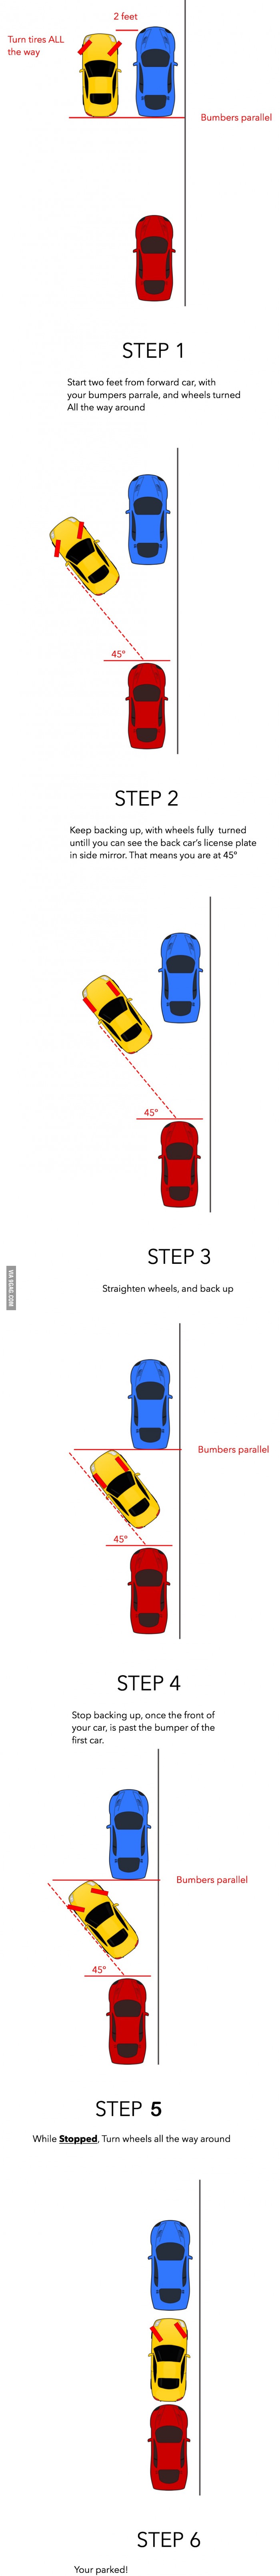 parking_howto.jpg